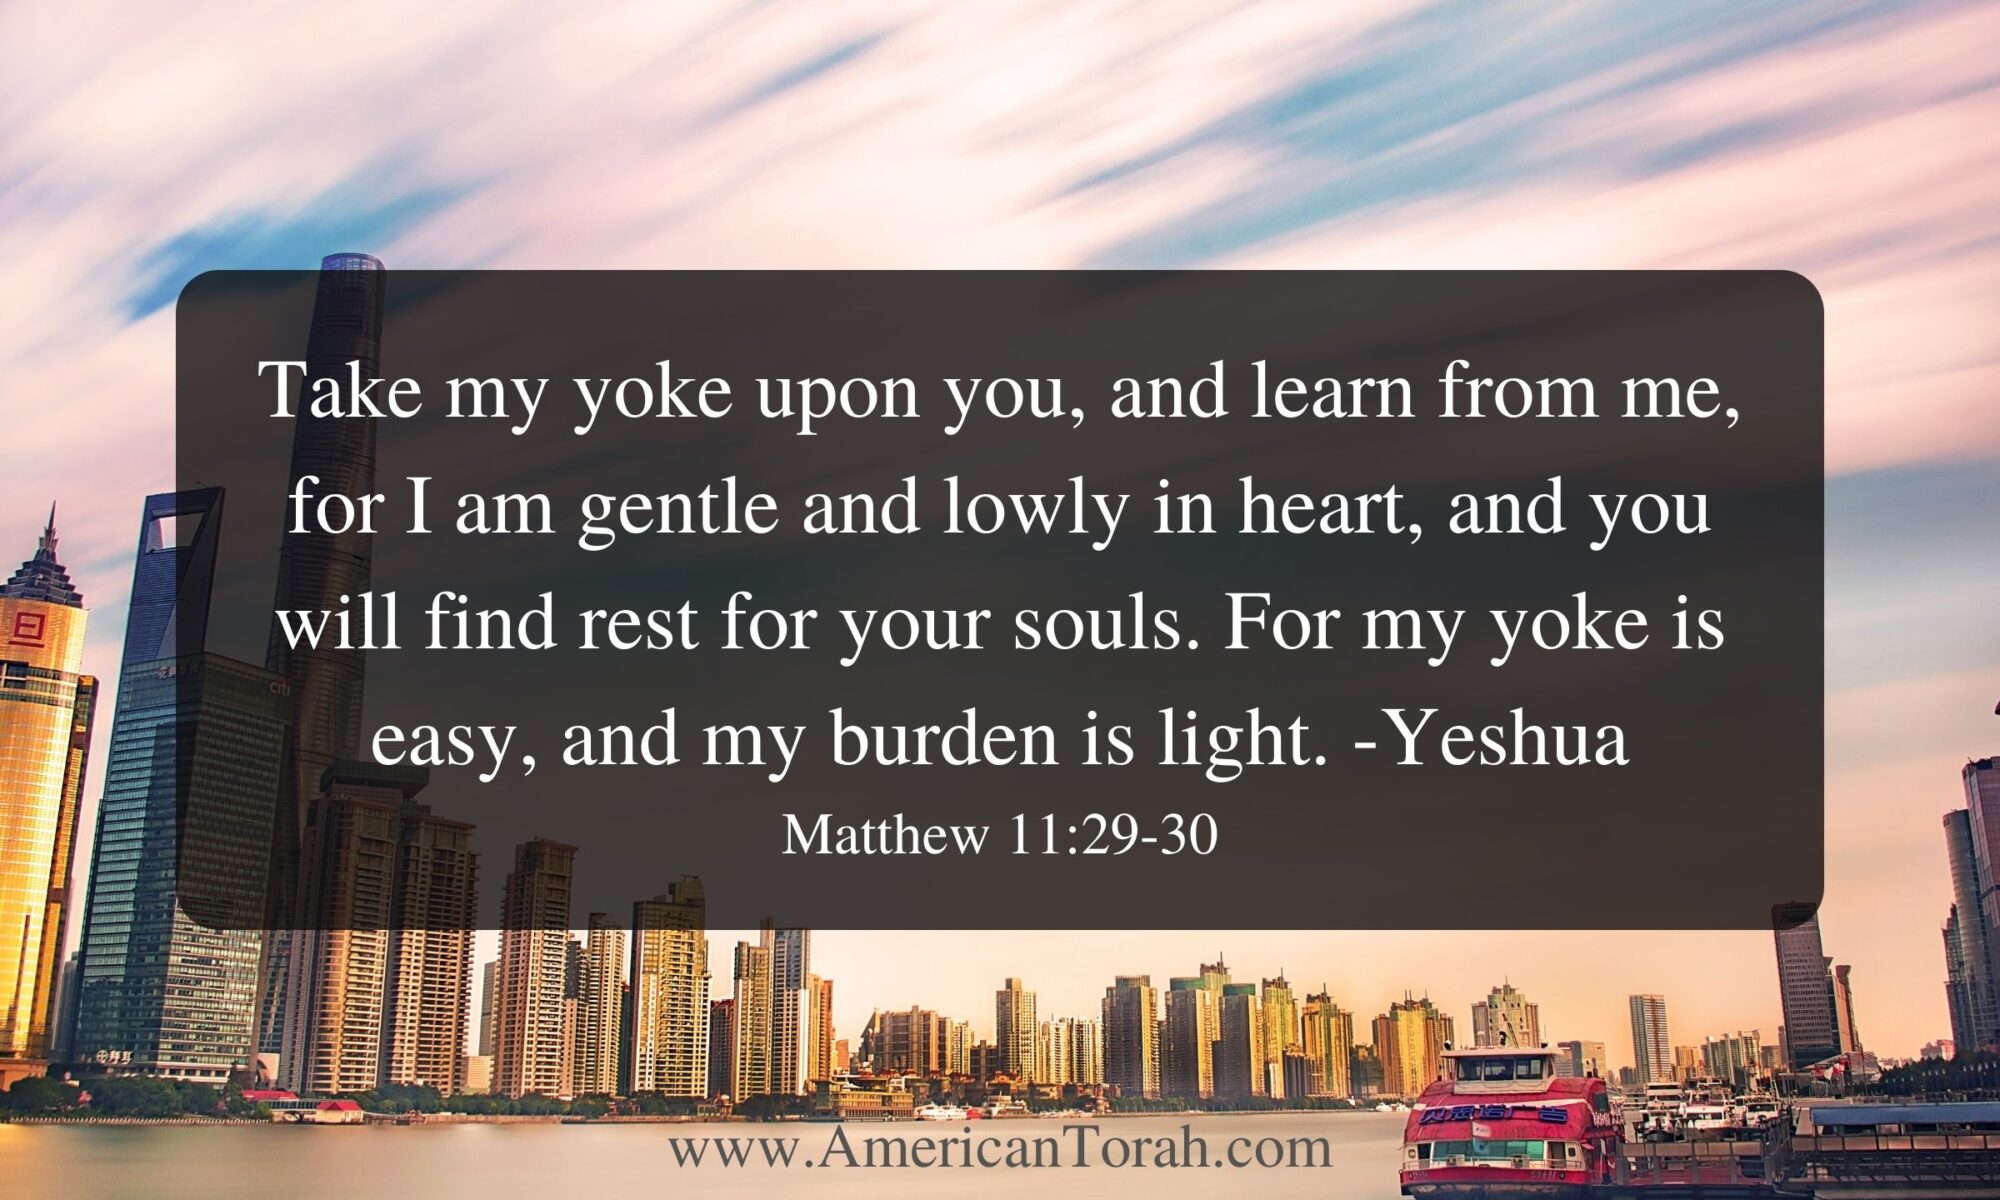 Take my yoke upon you, and learn from me, for I am gentle and lowly in heart, and you will find rest for your souls. For my yoke is easy, and my burden is light. Matthew 11:29-30